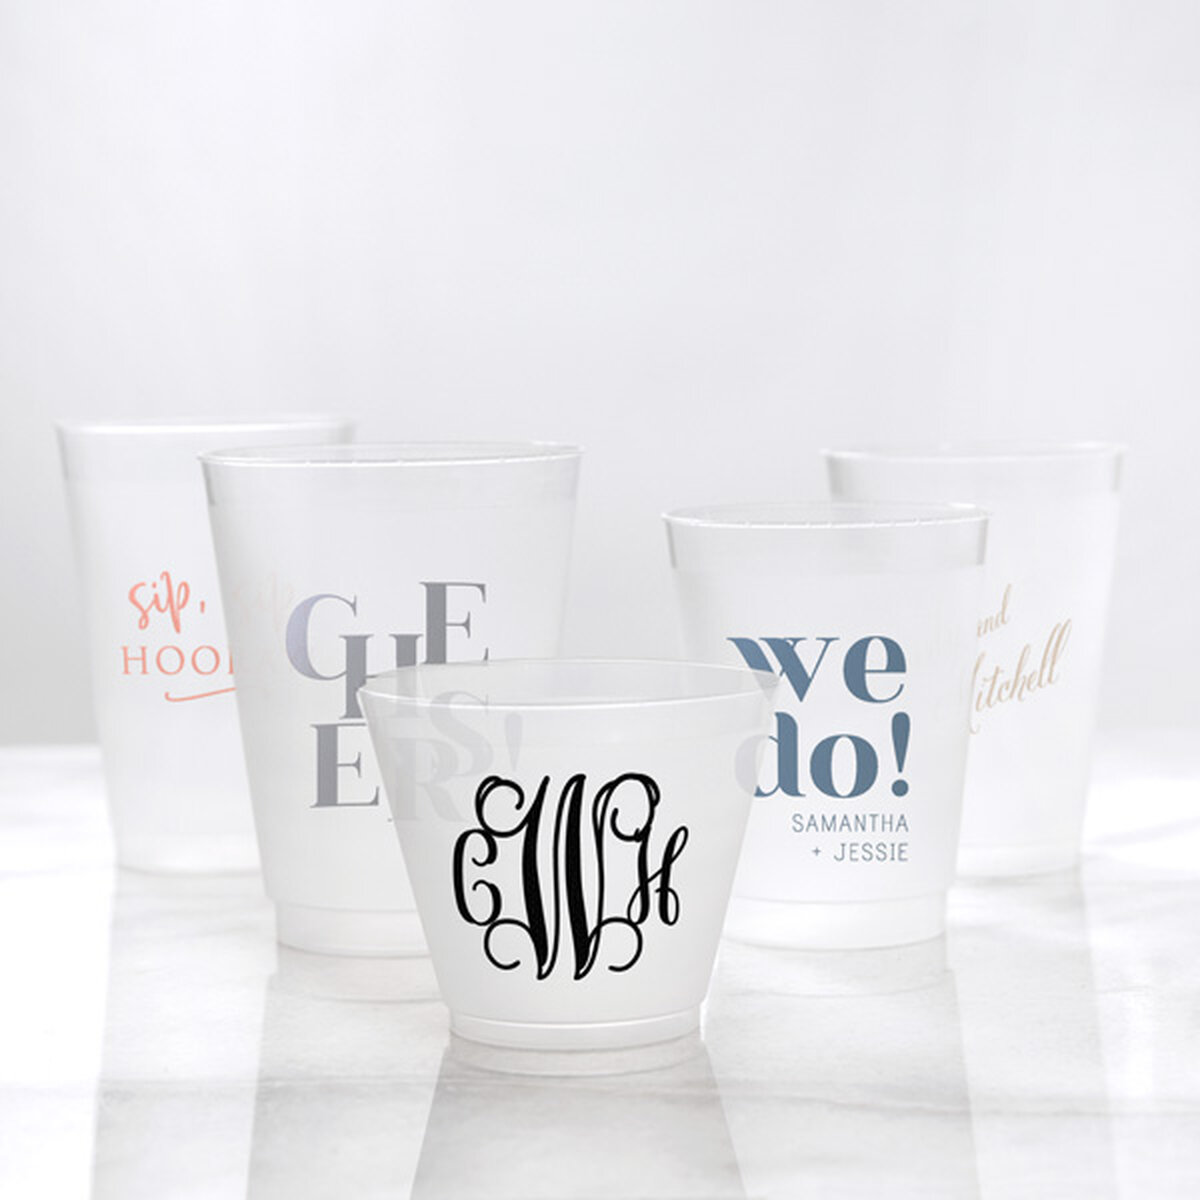 Monogram Cups Bachelorette Cups Plastic Cup Stadium Cups Party Cups Personalized Cups Custom Cups Event Cups Wedding Cups